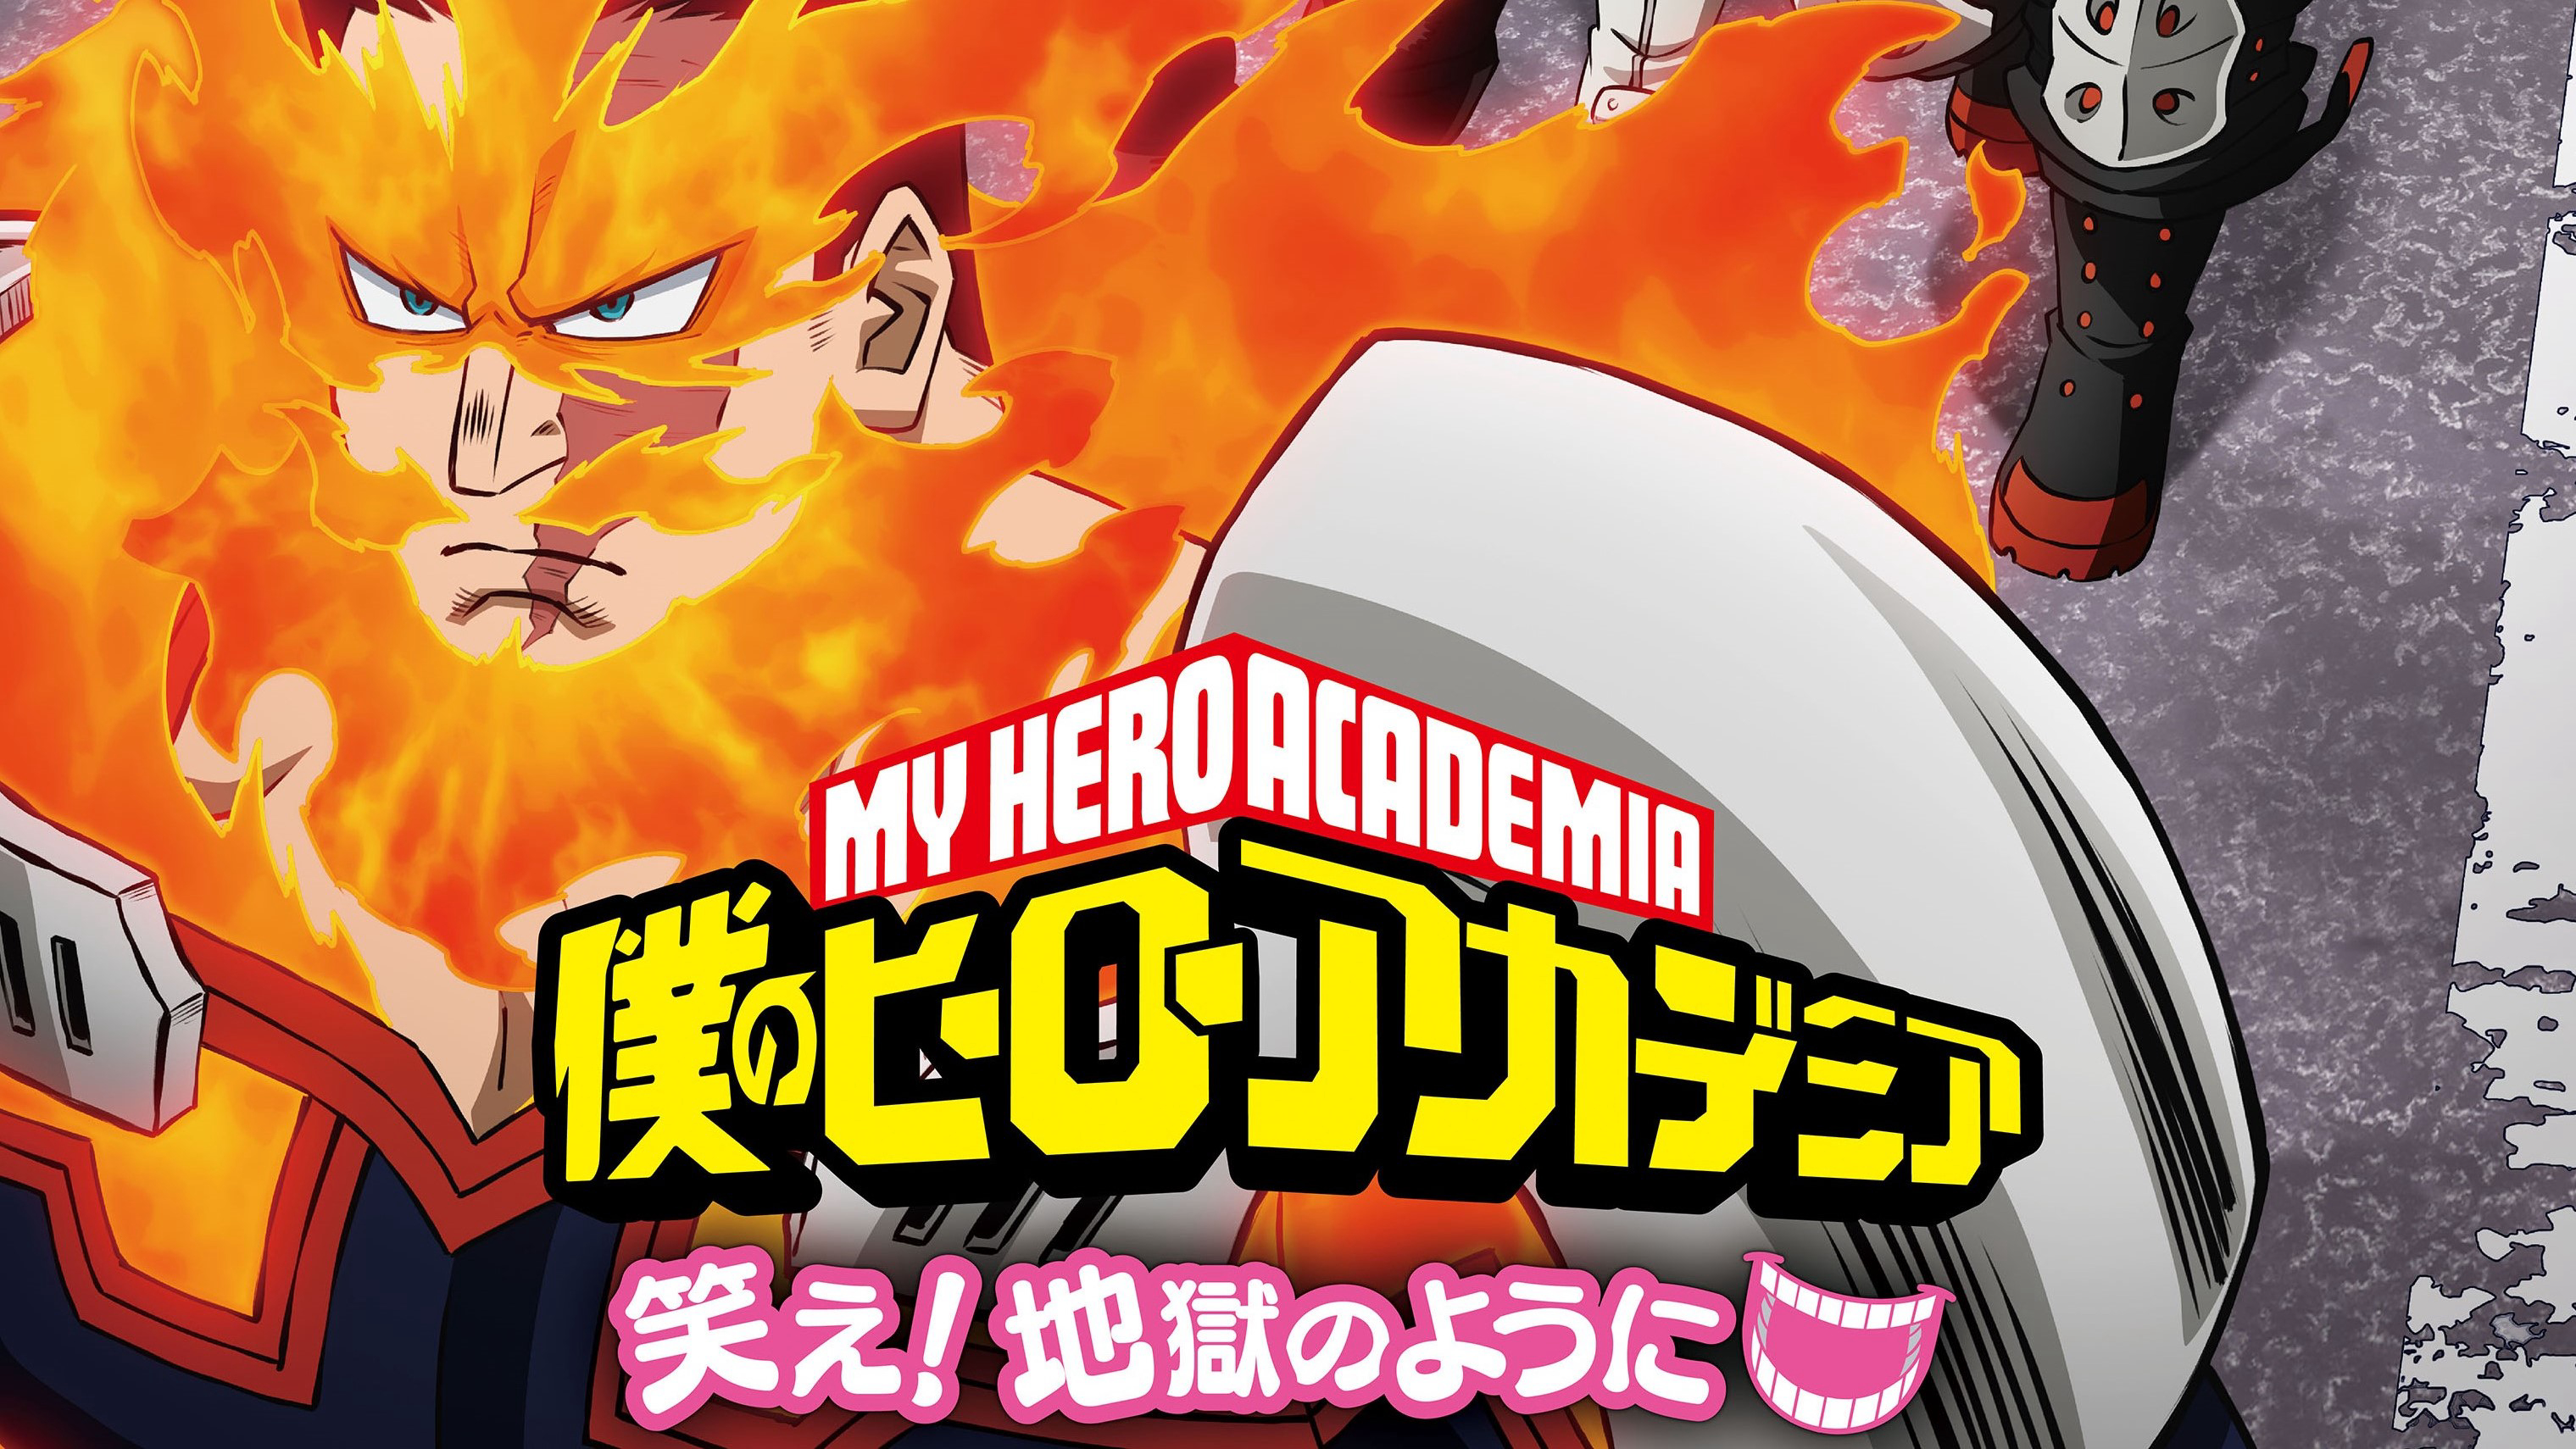 Xem Phim My Hero Academia Laugh! As if you are in hell, 僕のヒーローアカデミア 笑え！地獄のように 2022